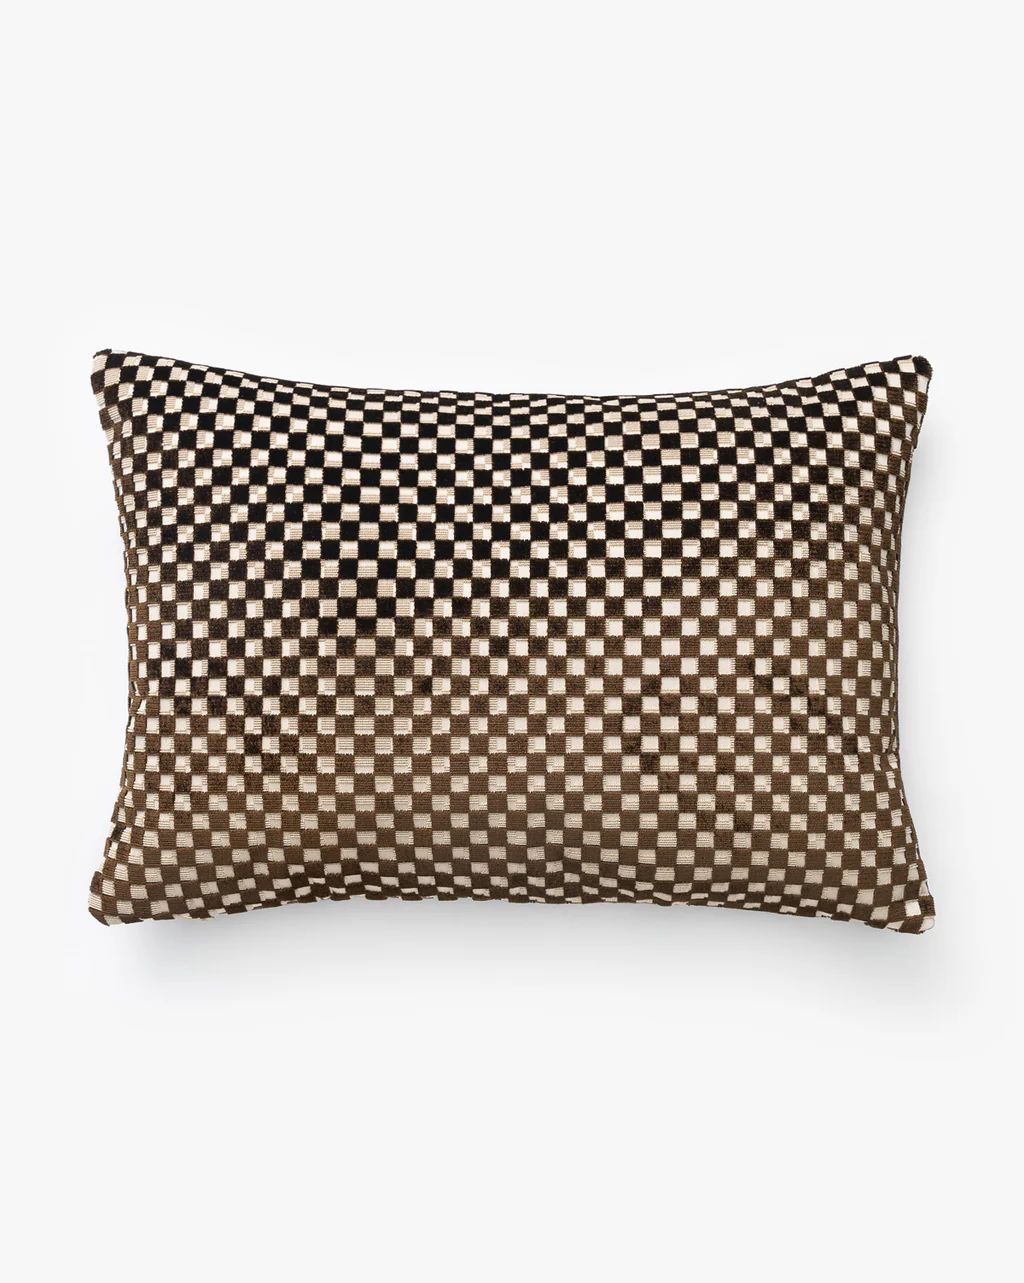 Tommen Pillow Cover | McGee & Co.